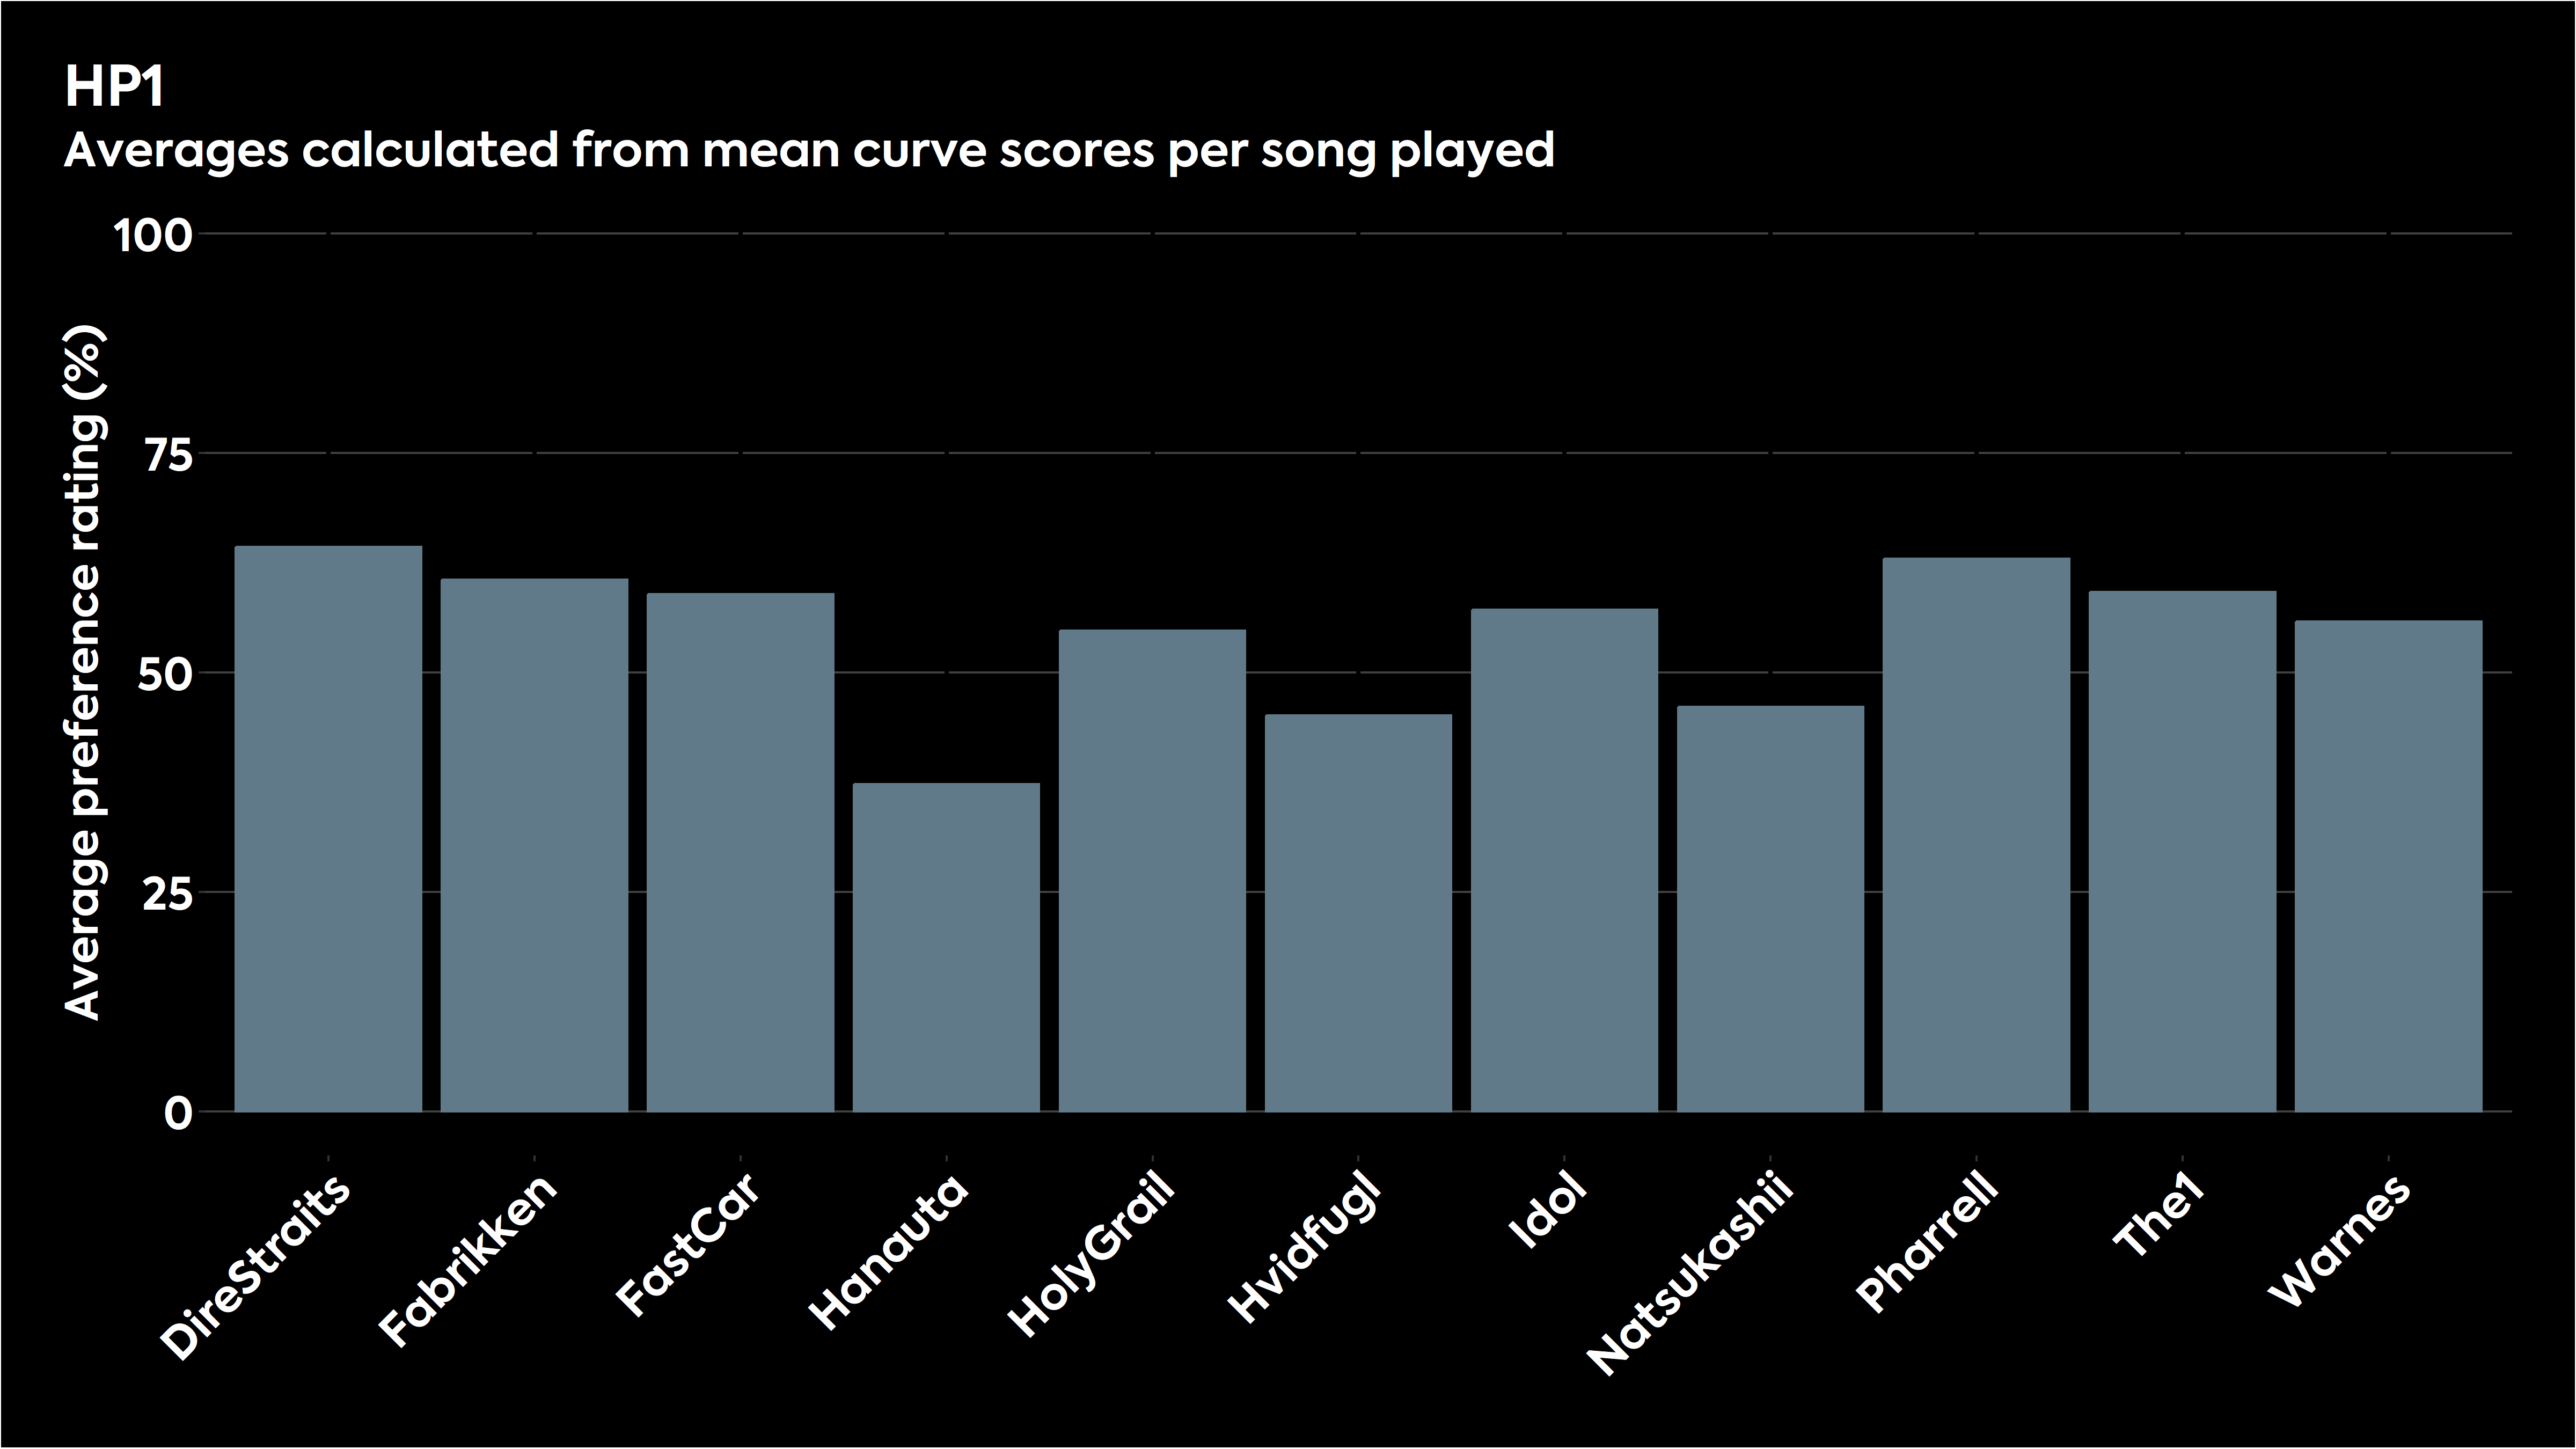 Bar chart showing how the various stimuli were judged for HP1 in listening tests.